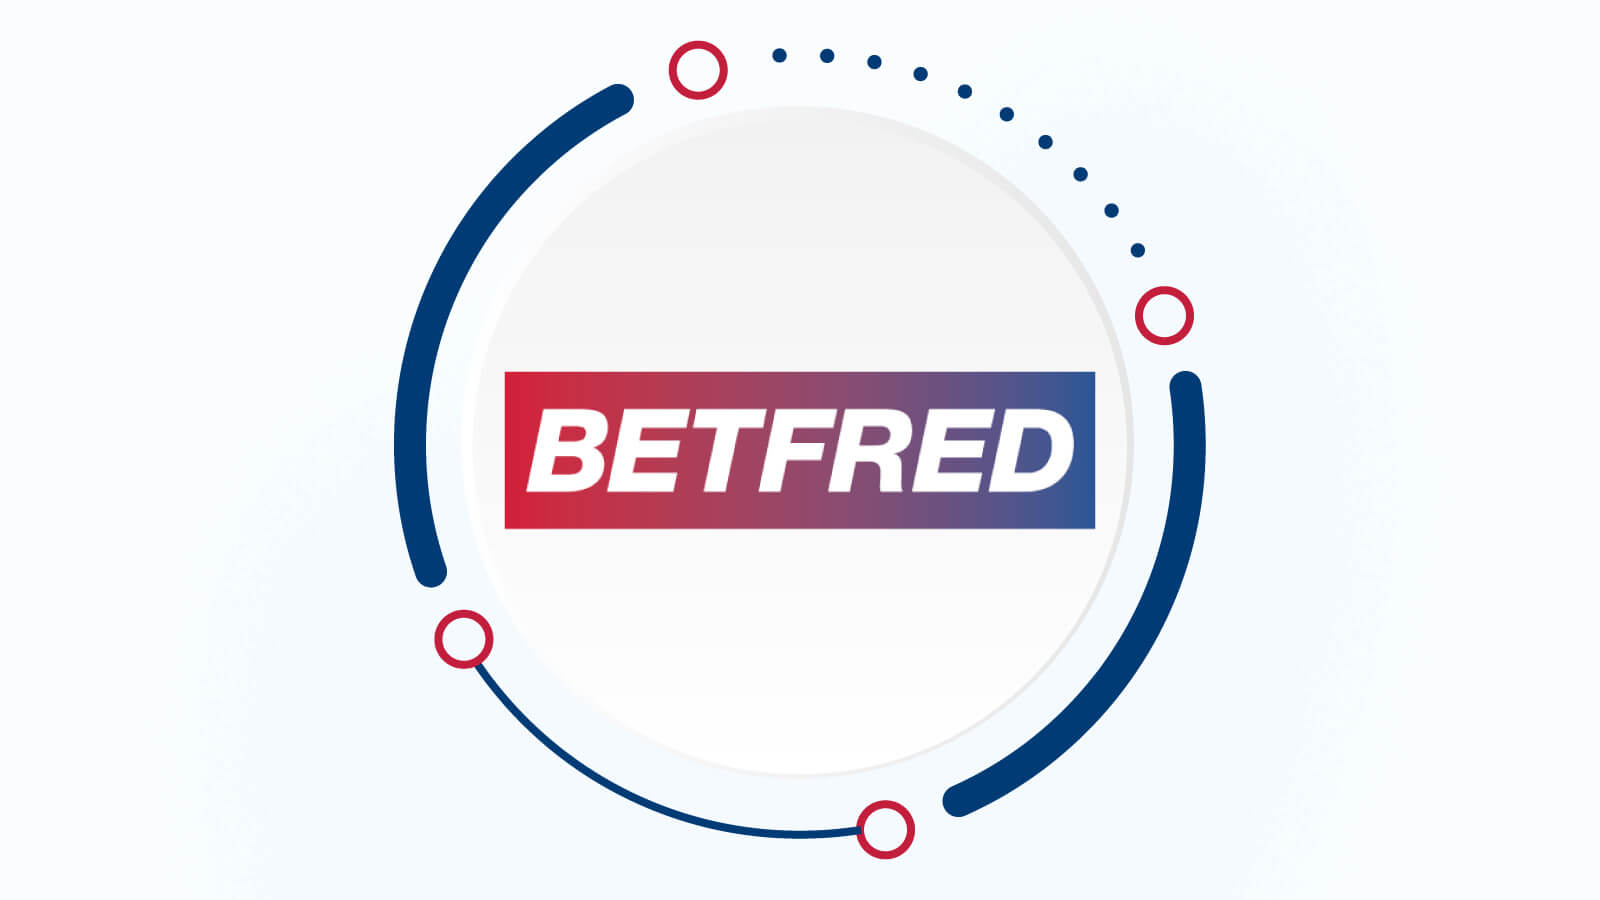 BetFred – Best weekly free spins for existing players